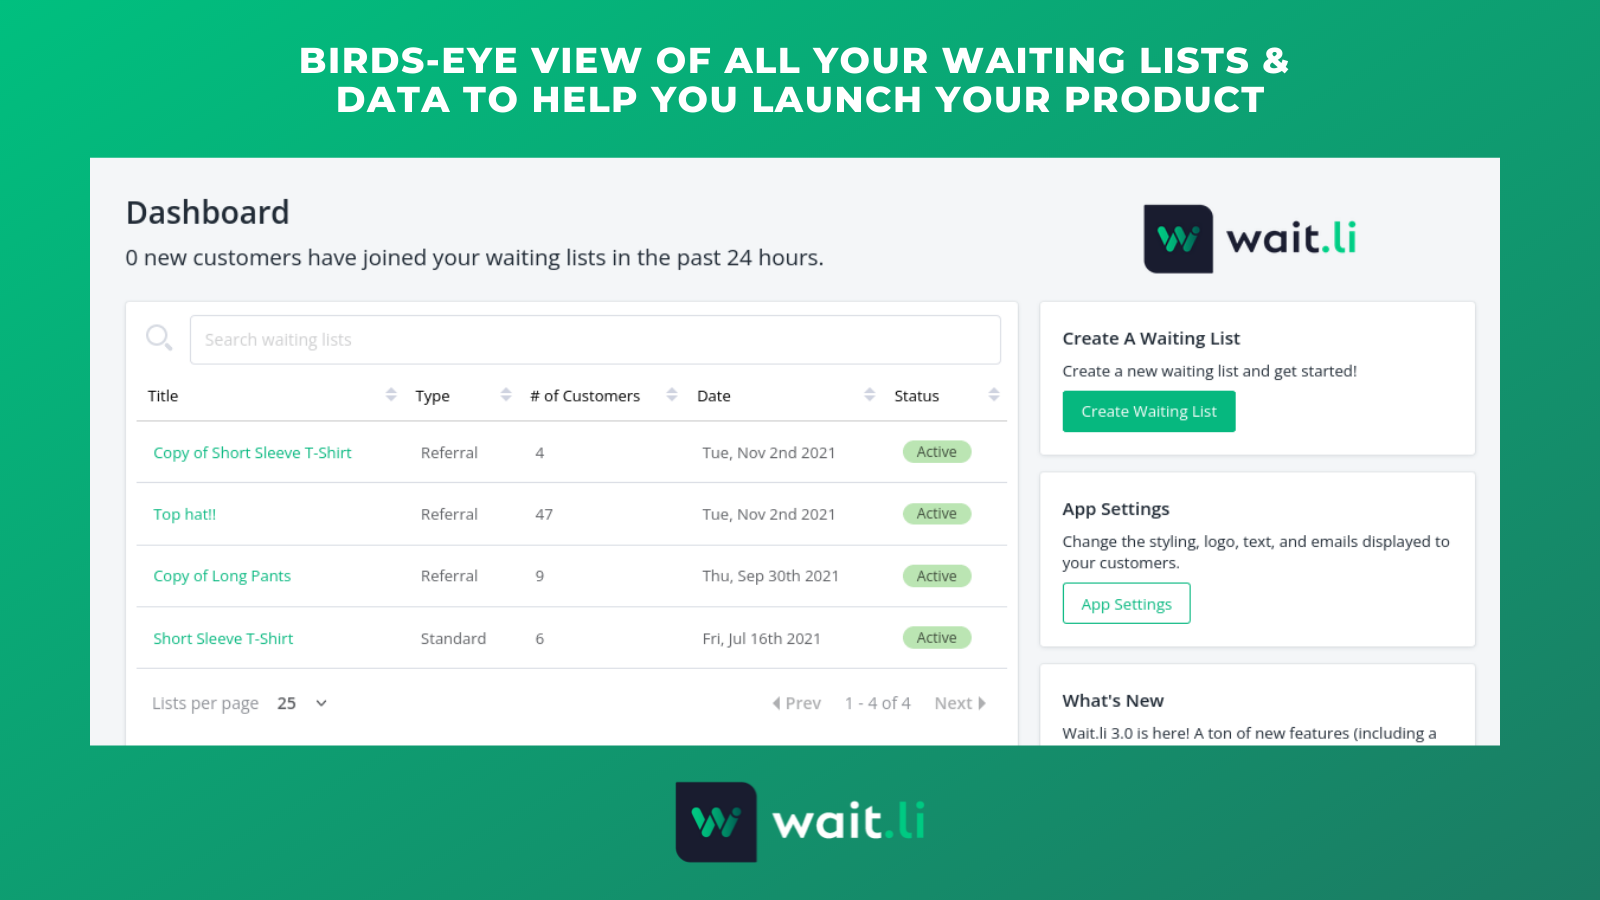 View all your waiting list data to better launch your products